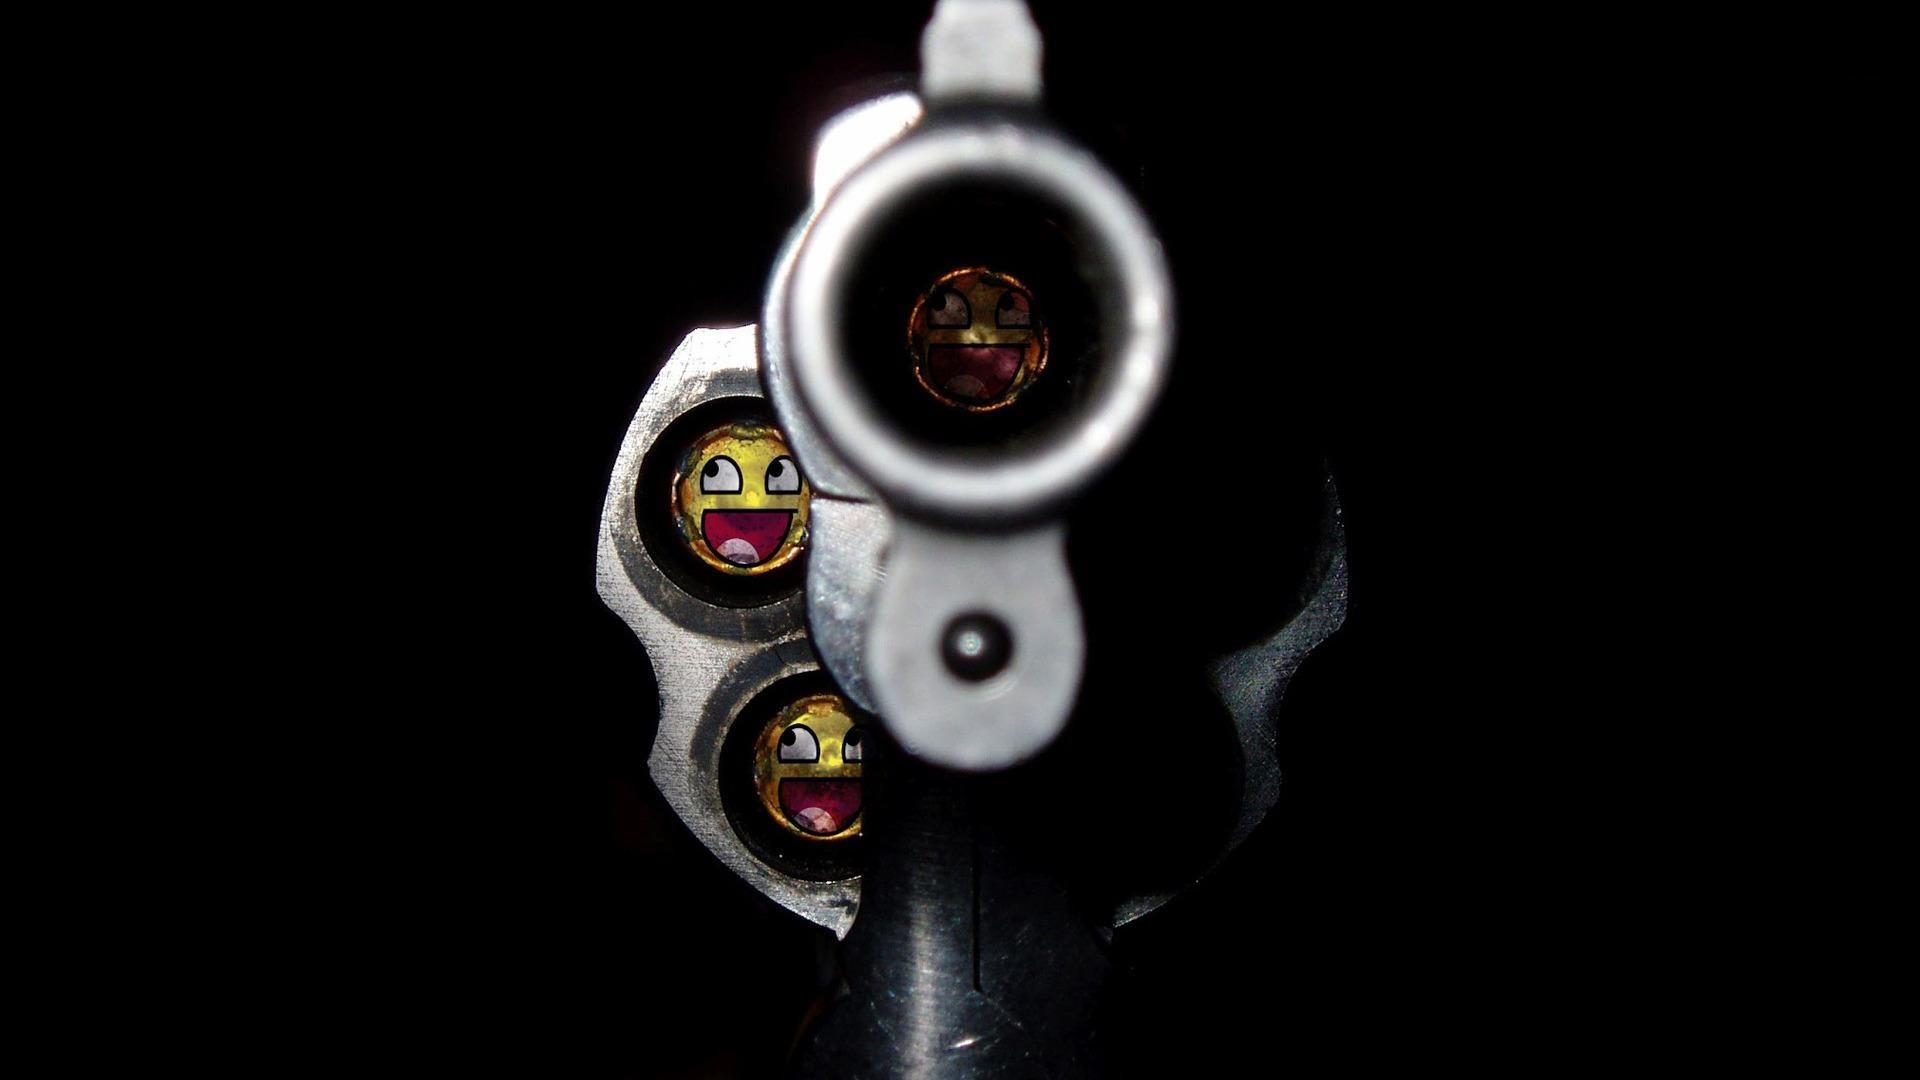 1920x1080 The muzzle of a revolver wallpapers and images - wallpapers .